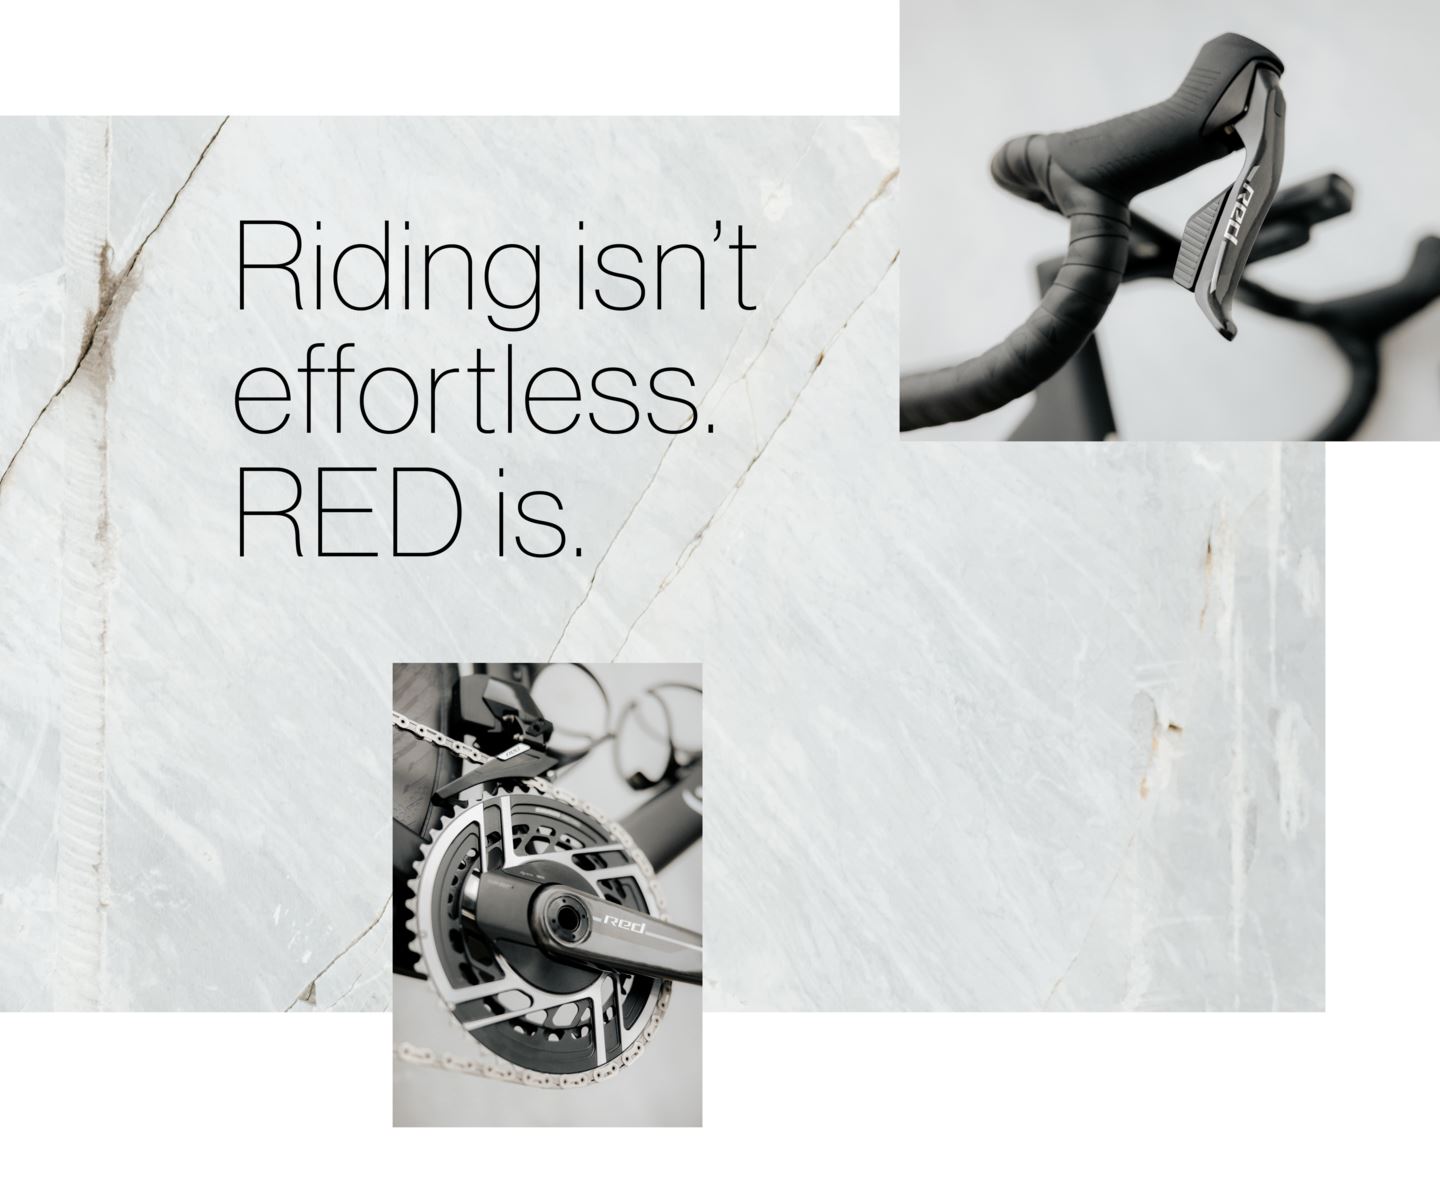 Riding isn't effortless. RED is.